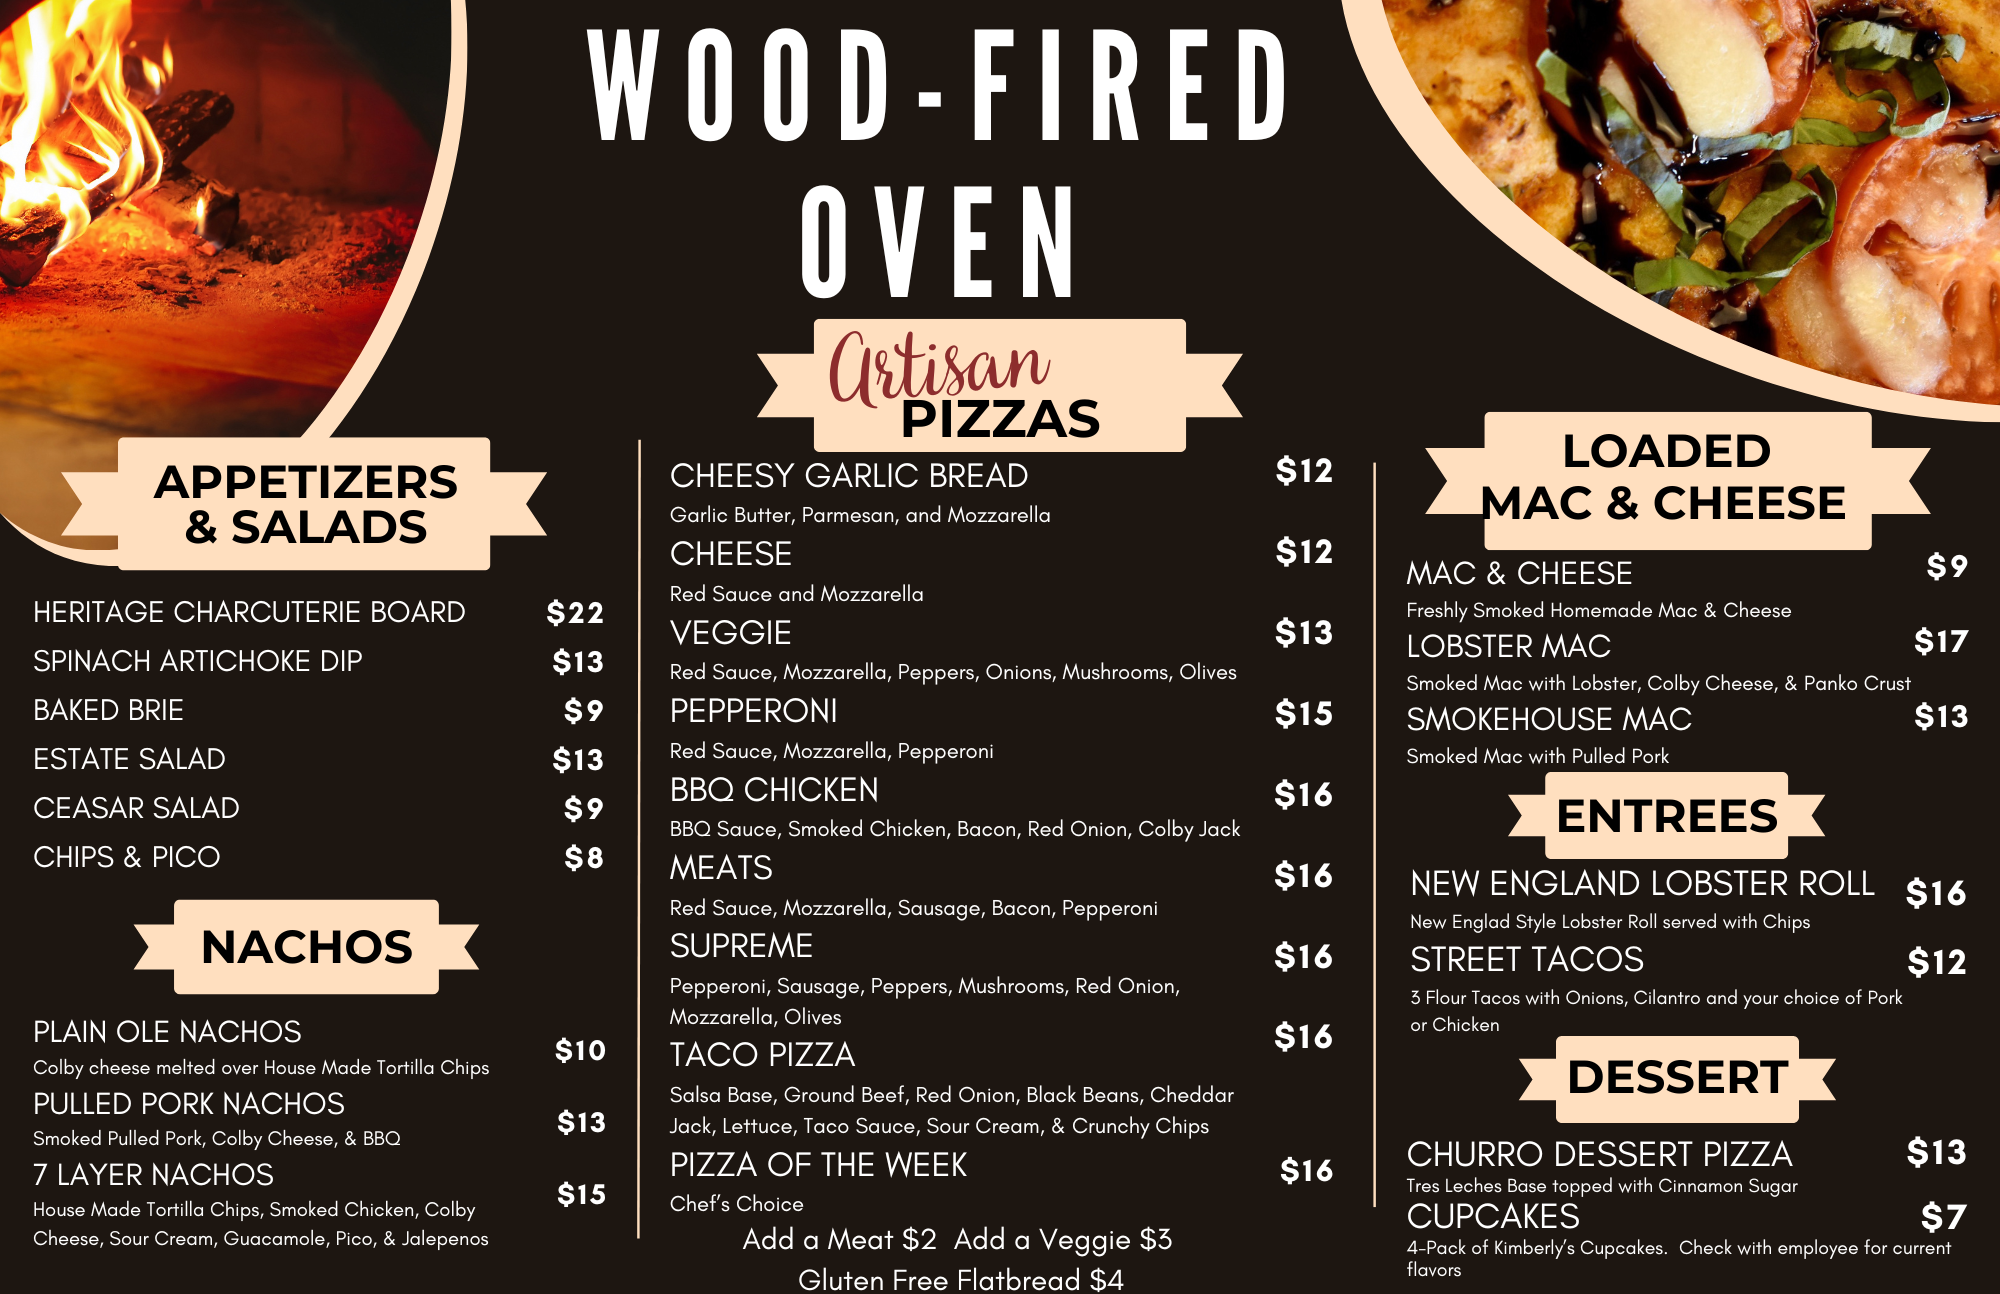 WOOd-Fired Oven with Tacos & Churro Dessert